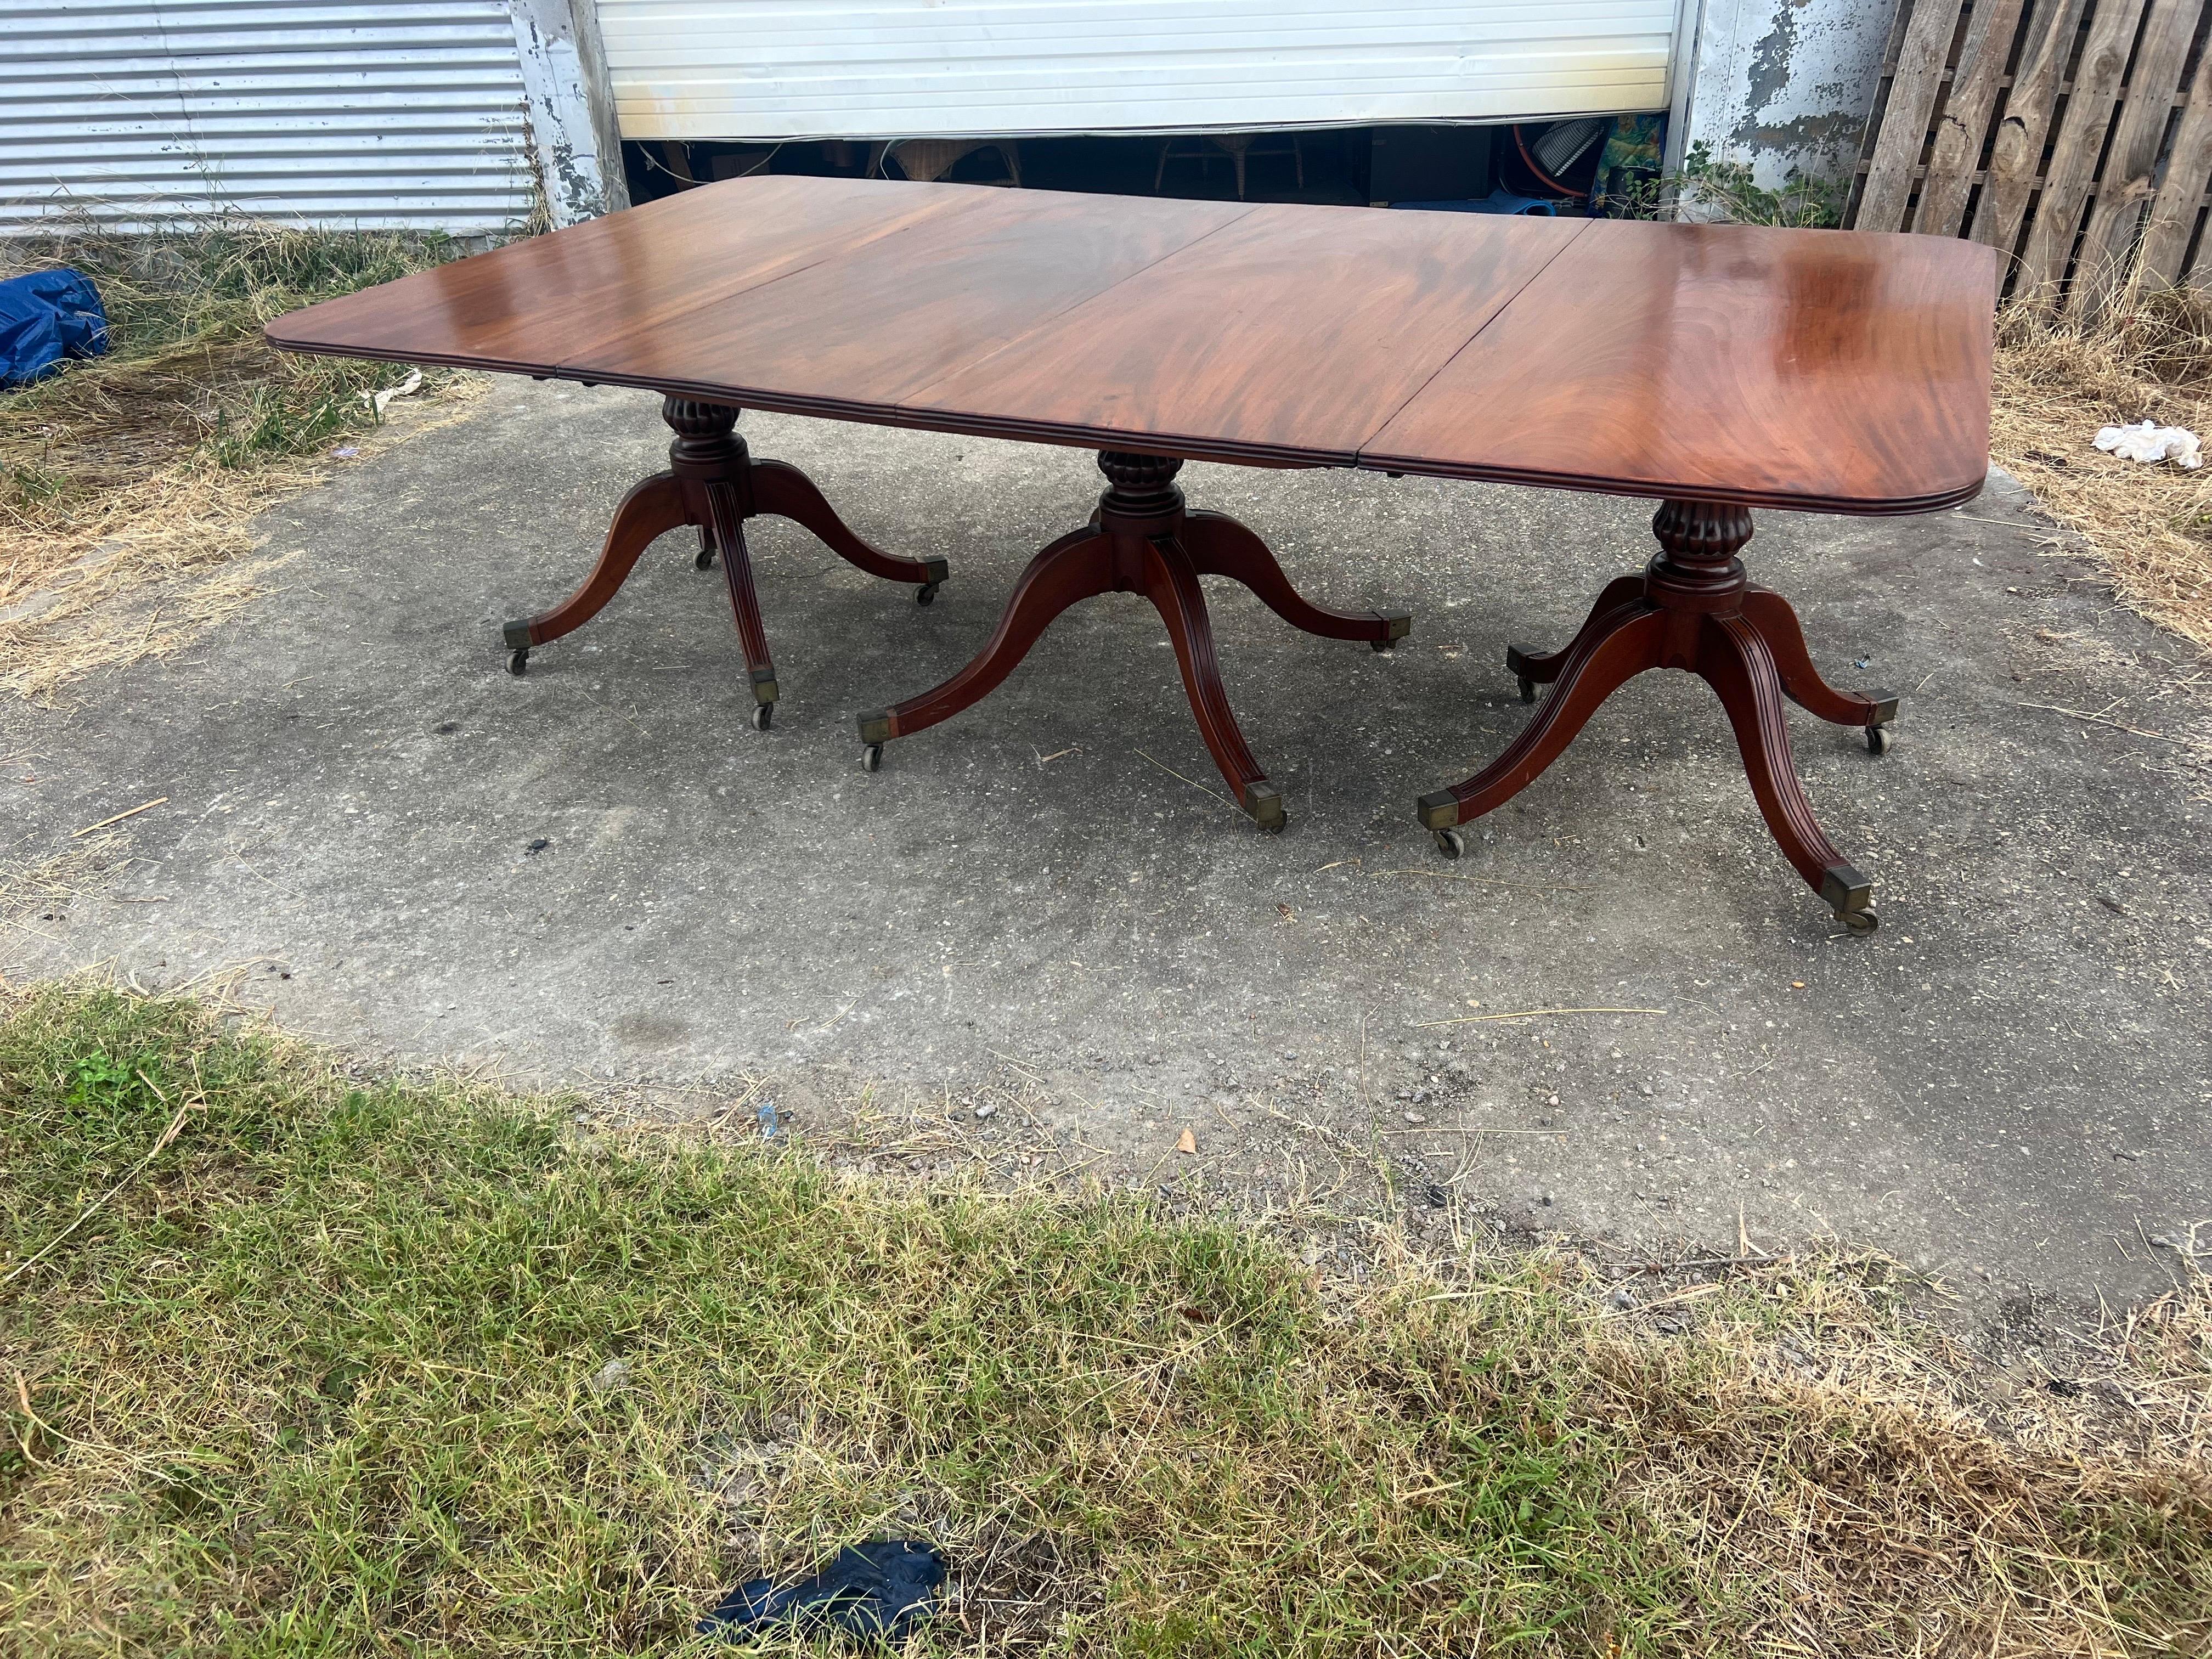 19th century English Regency mahogany triple pedestal dining table with highly figured and West Indies mahogany. Three pedestal bases with 4 reeded legs each with original castors. Table can be used as a double pedestal as well. 